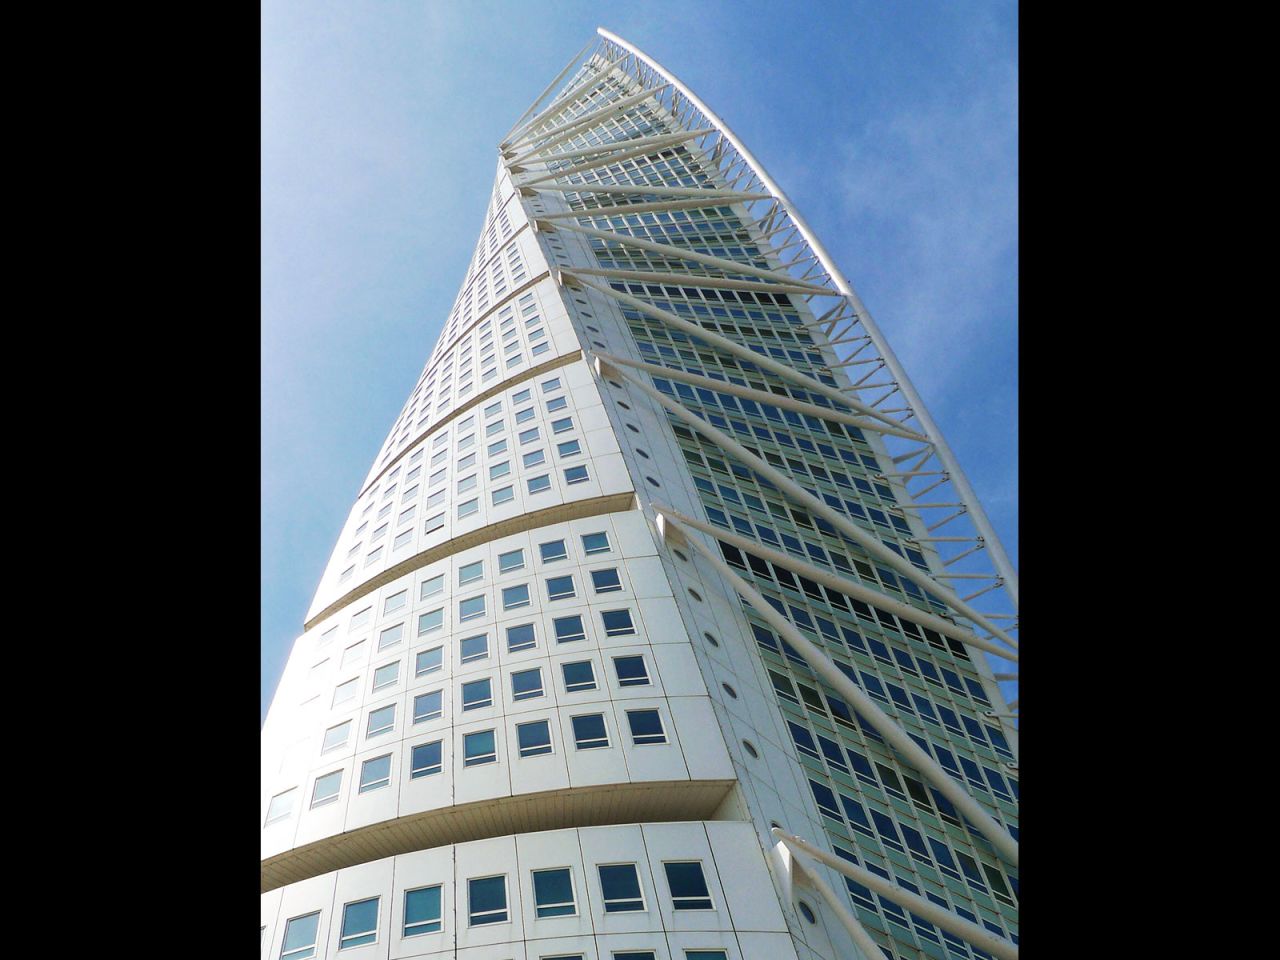 "The unconventional form of a twisting building means every component of tall building design must be rethought," says the CTBUH report author, Shawn Ursini. 